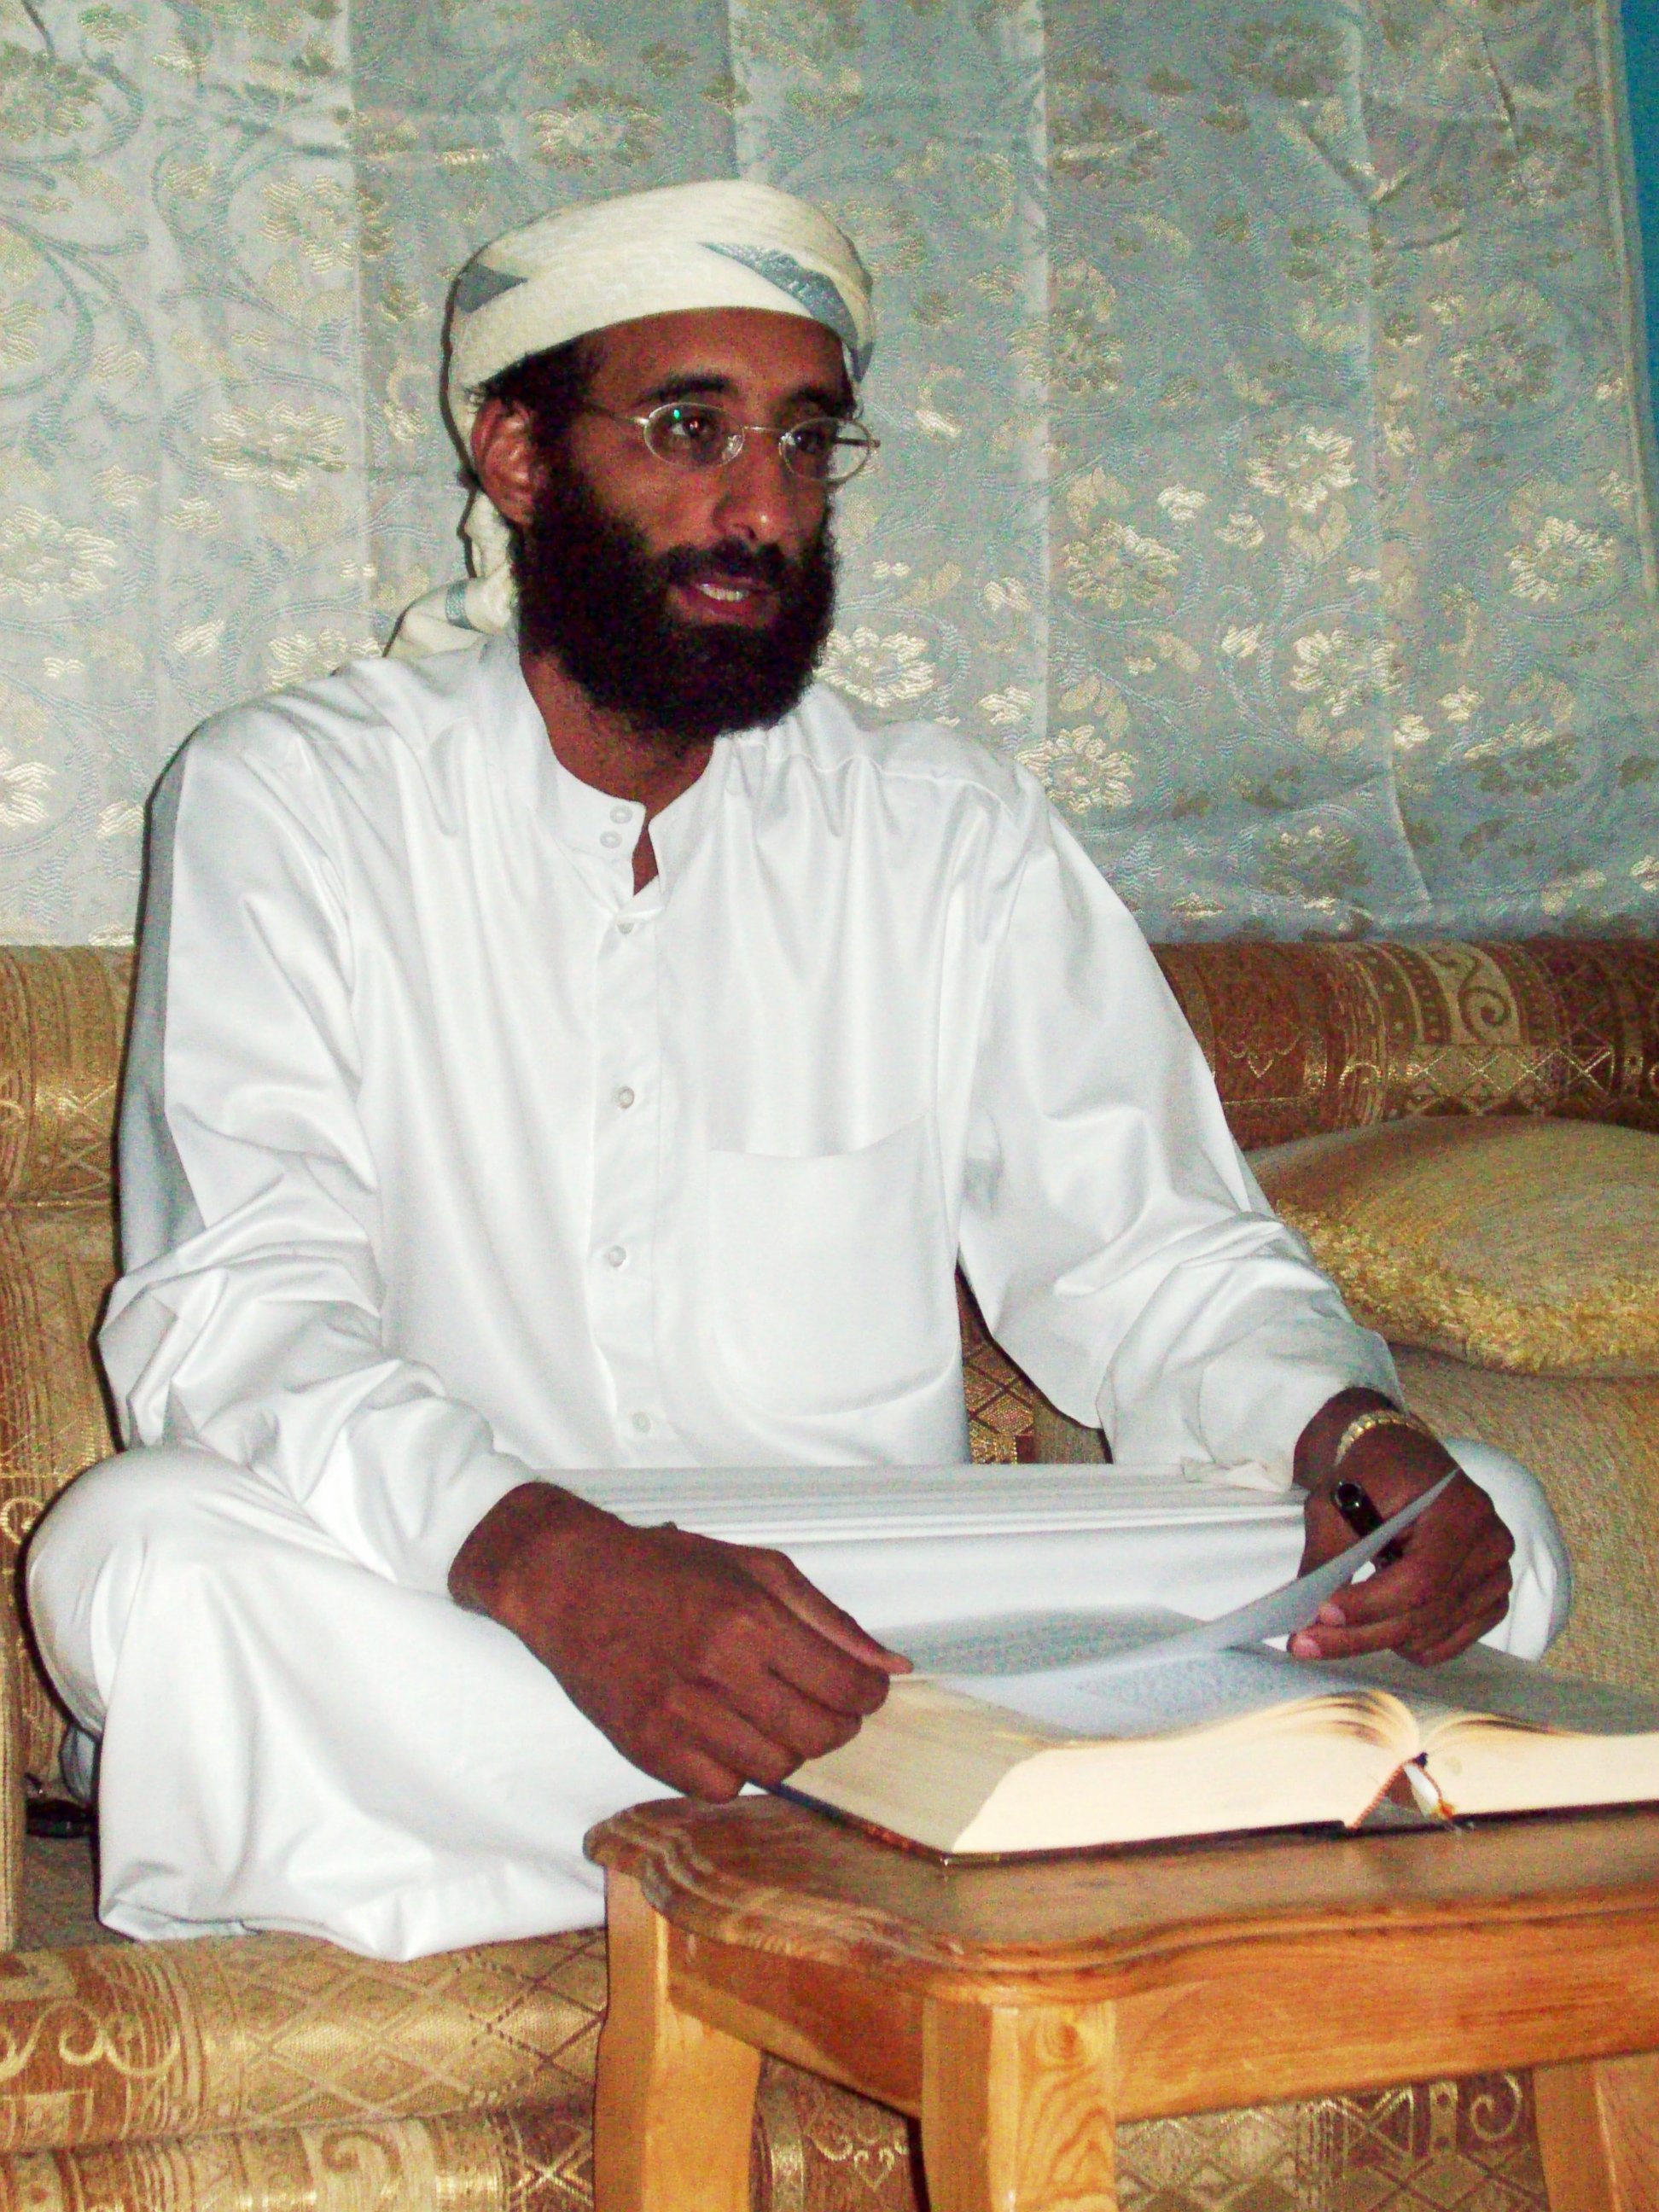 PHOTO: FBI agents found that Shannon Conley had CDs and DVDs labeled with the name of radical imam Anwar al-Awlaki, pictured in this 2008 file photo, who was killed in 2011.